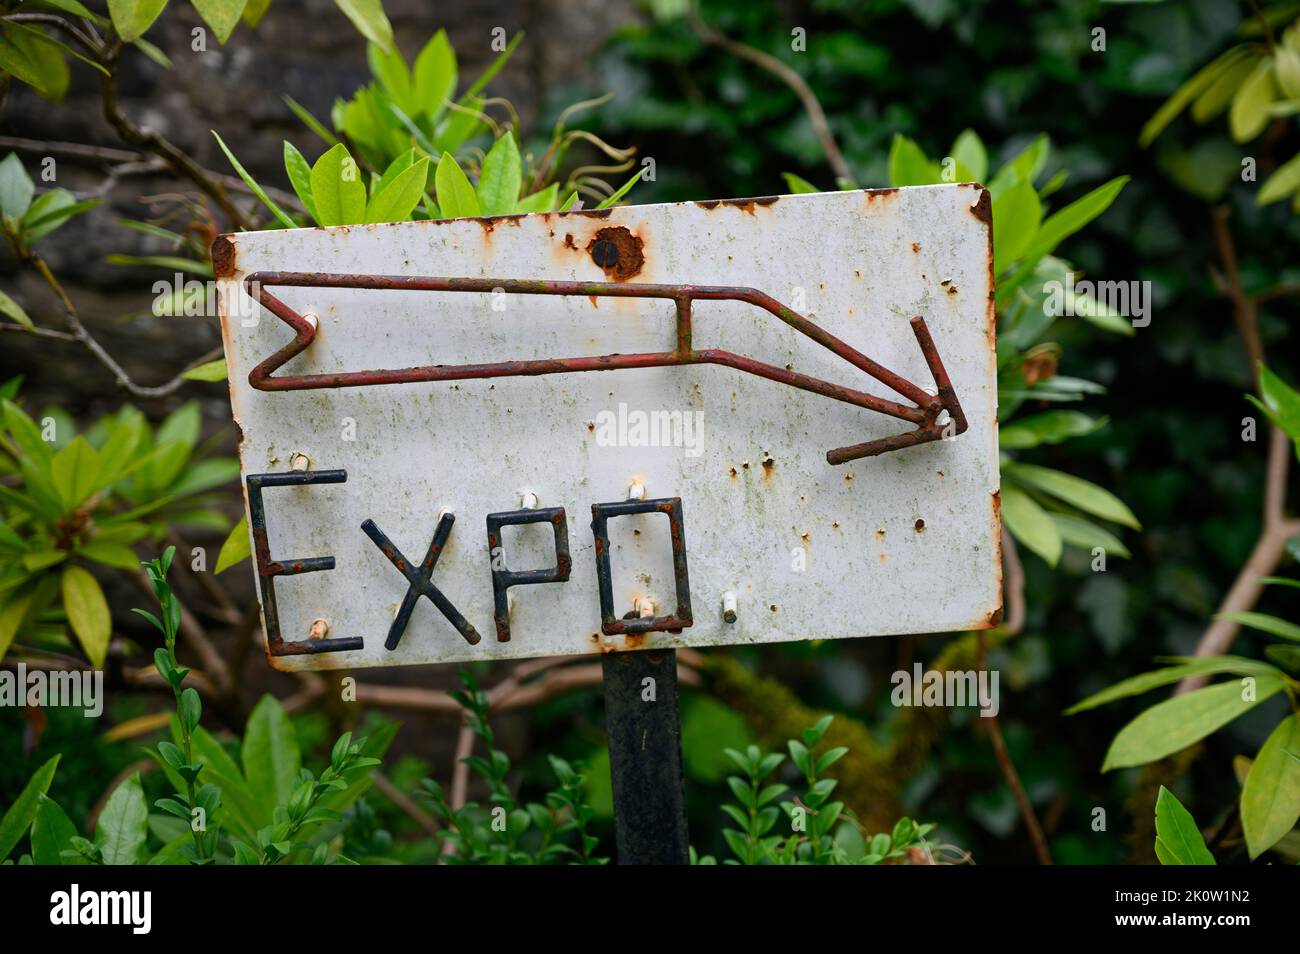 An old rusty 'expo' sign. Stock Photo